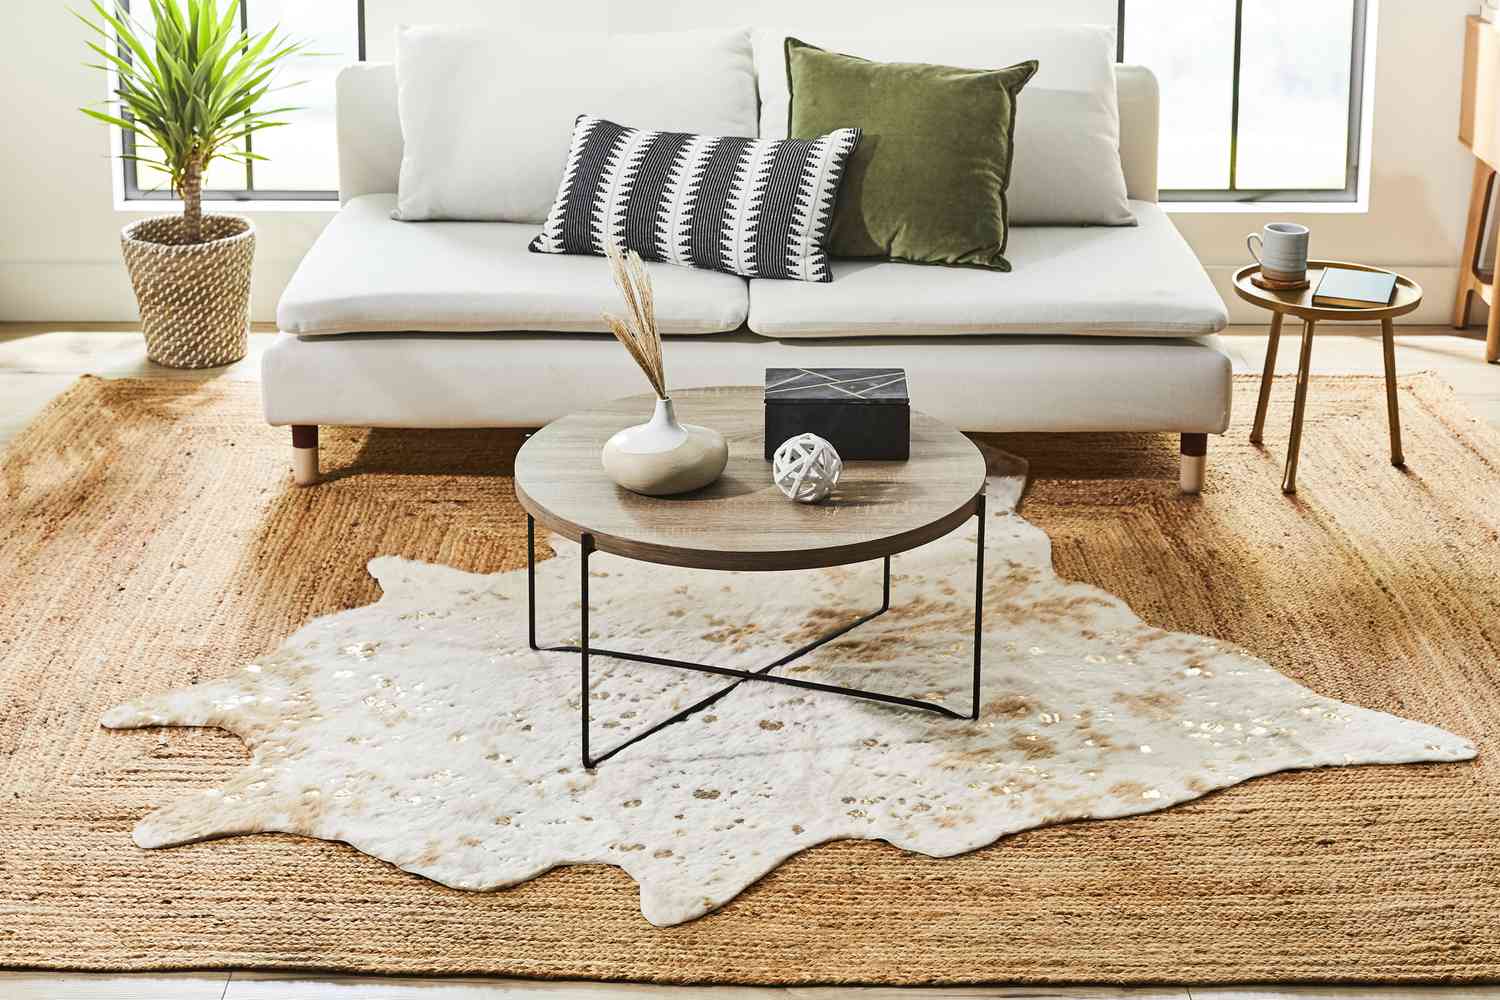 How To Layer Rugs In Living Room